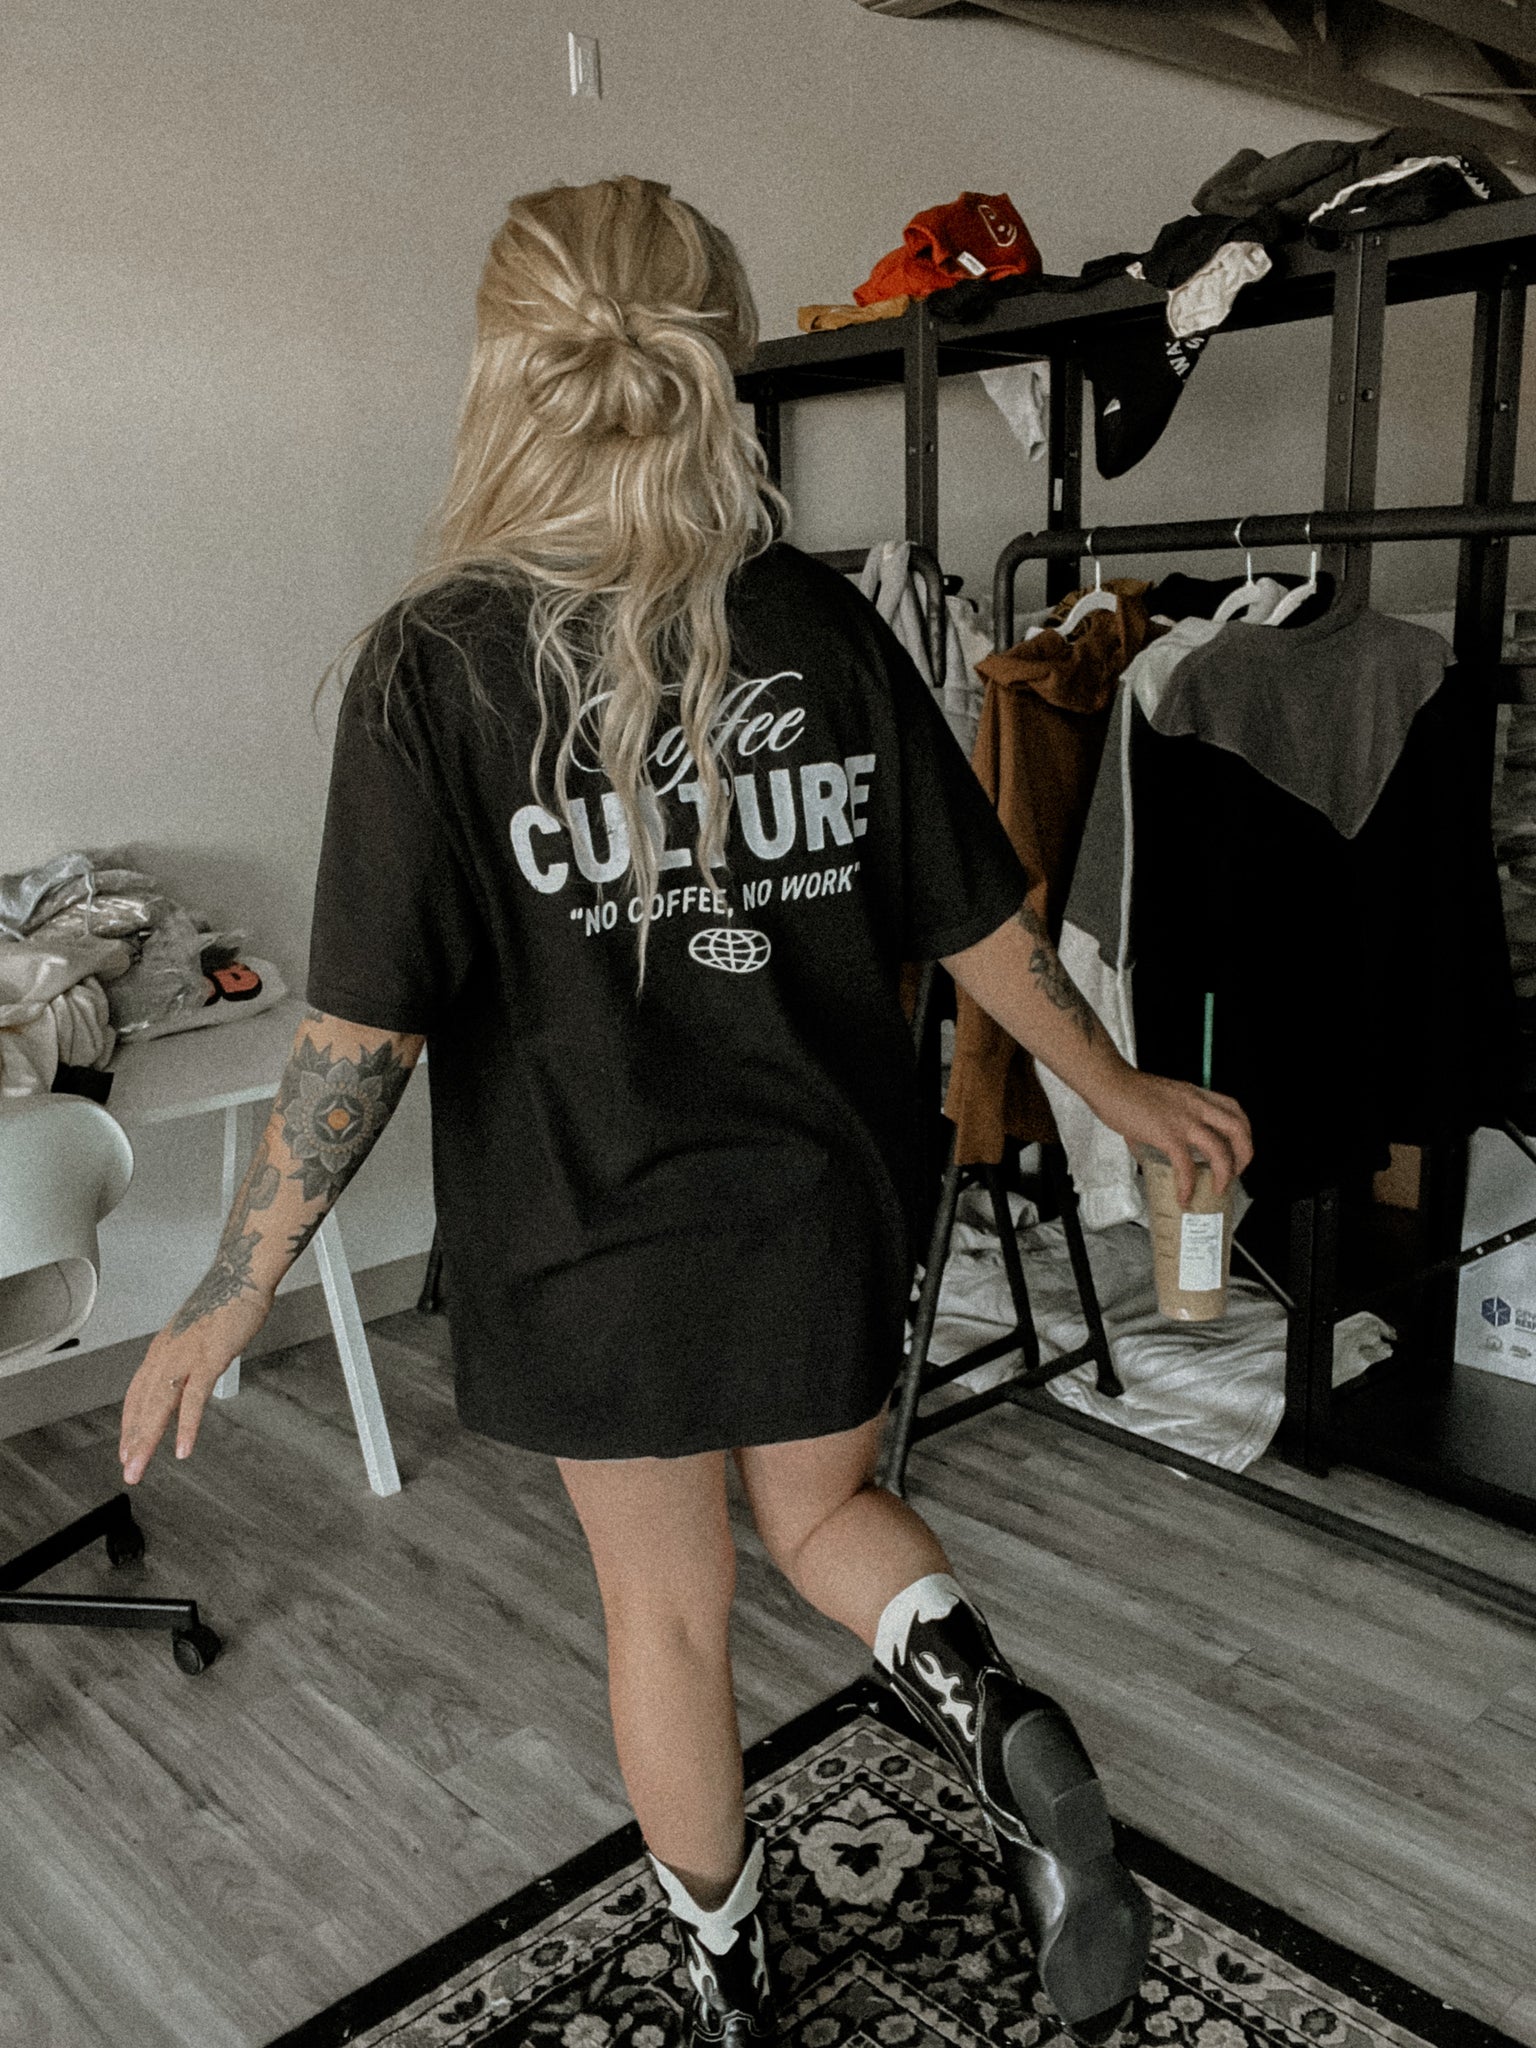 Coffee Culture Tee – We The Babes